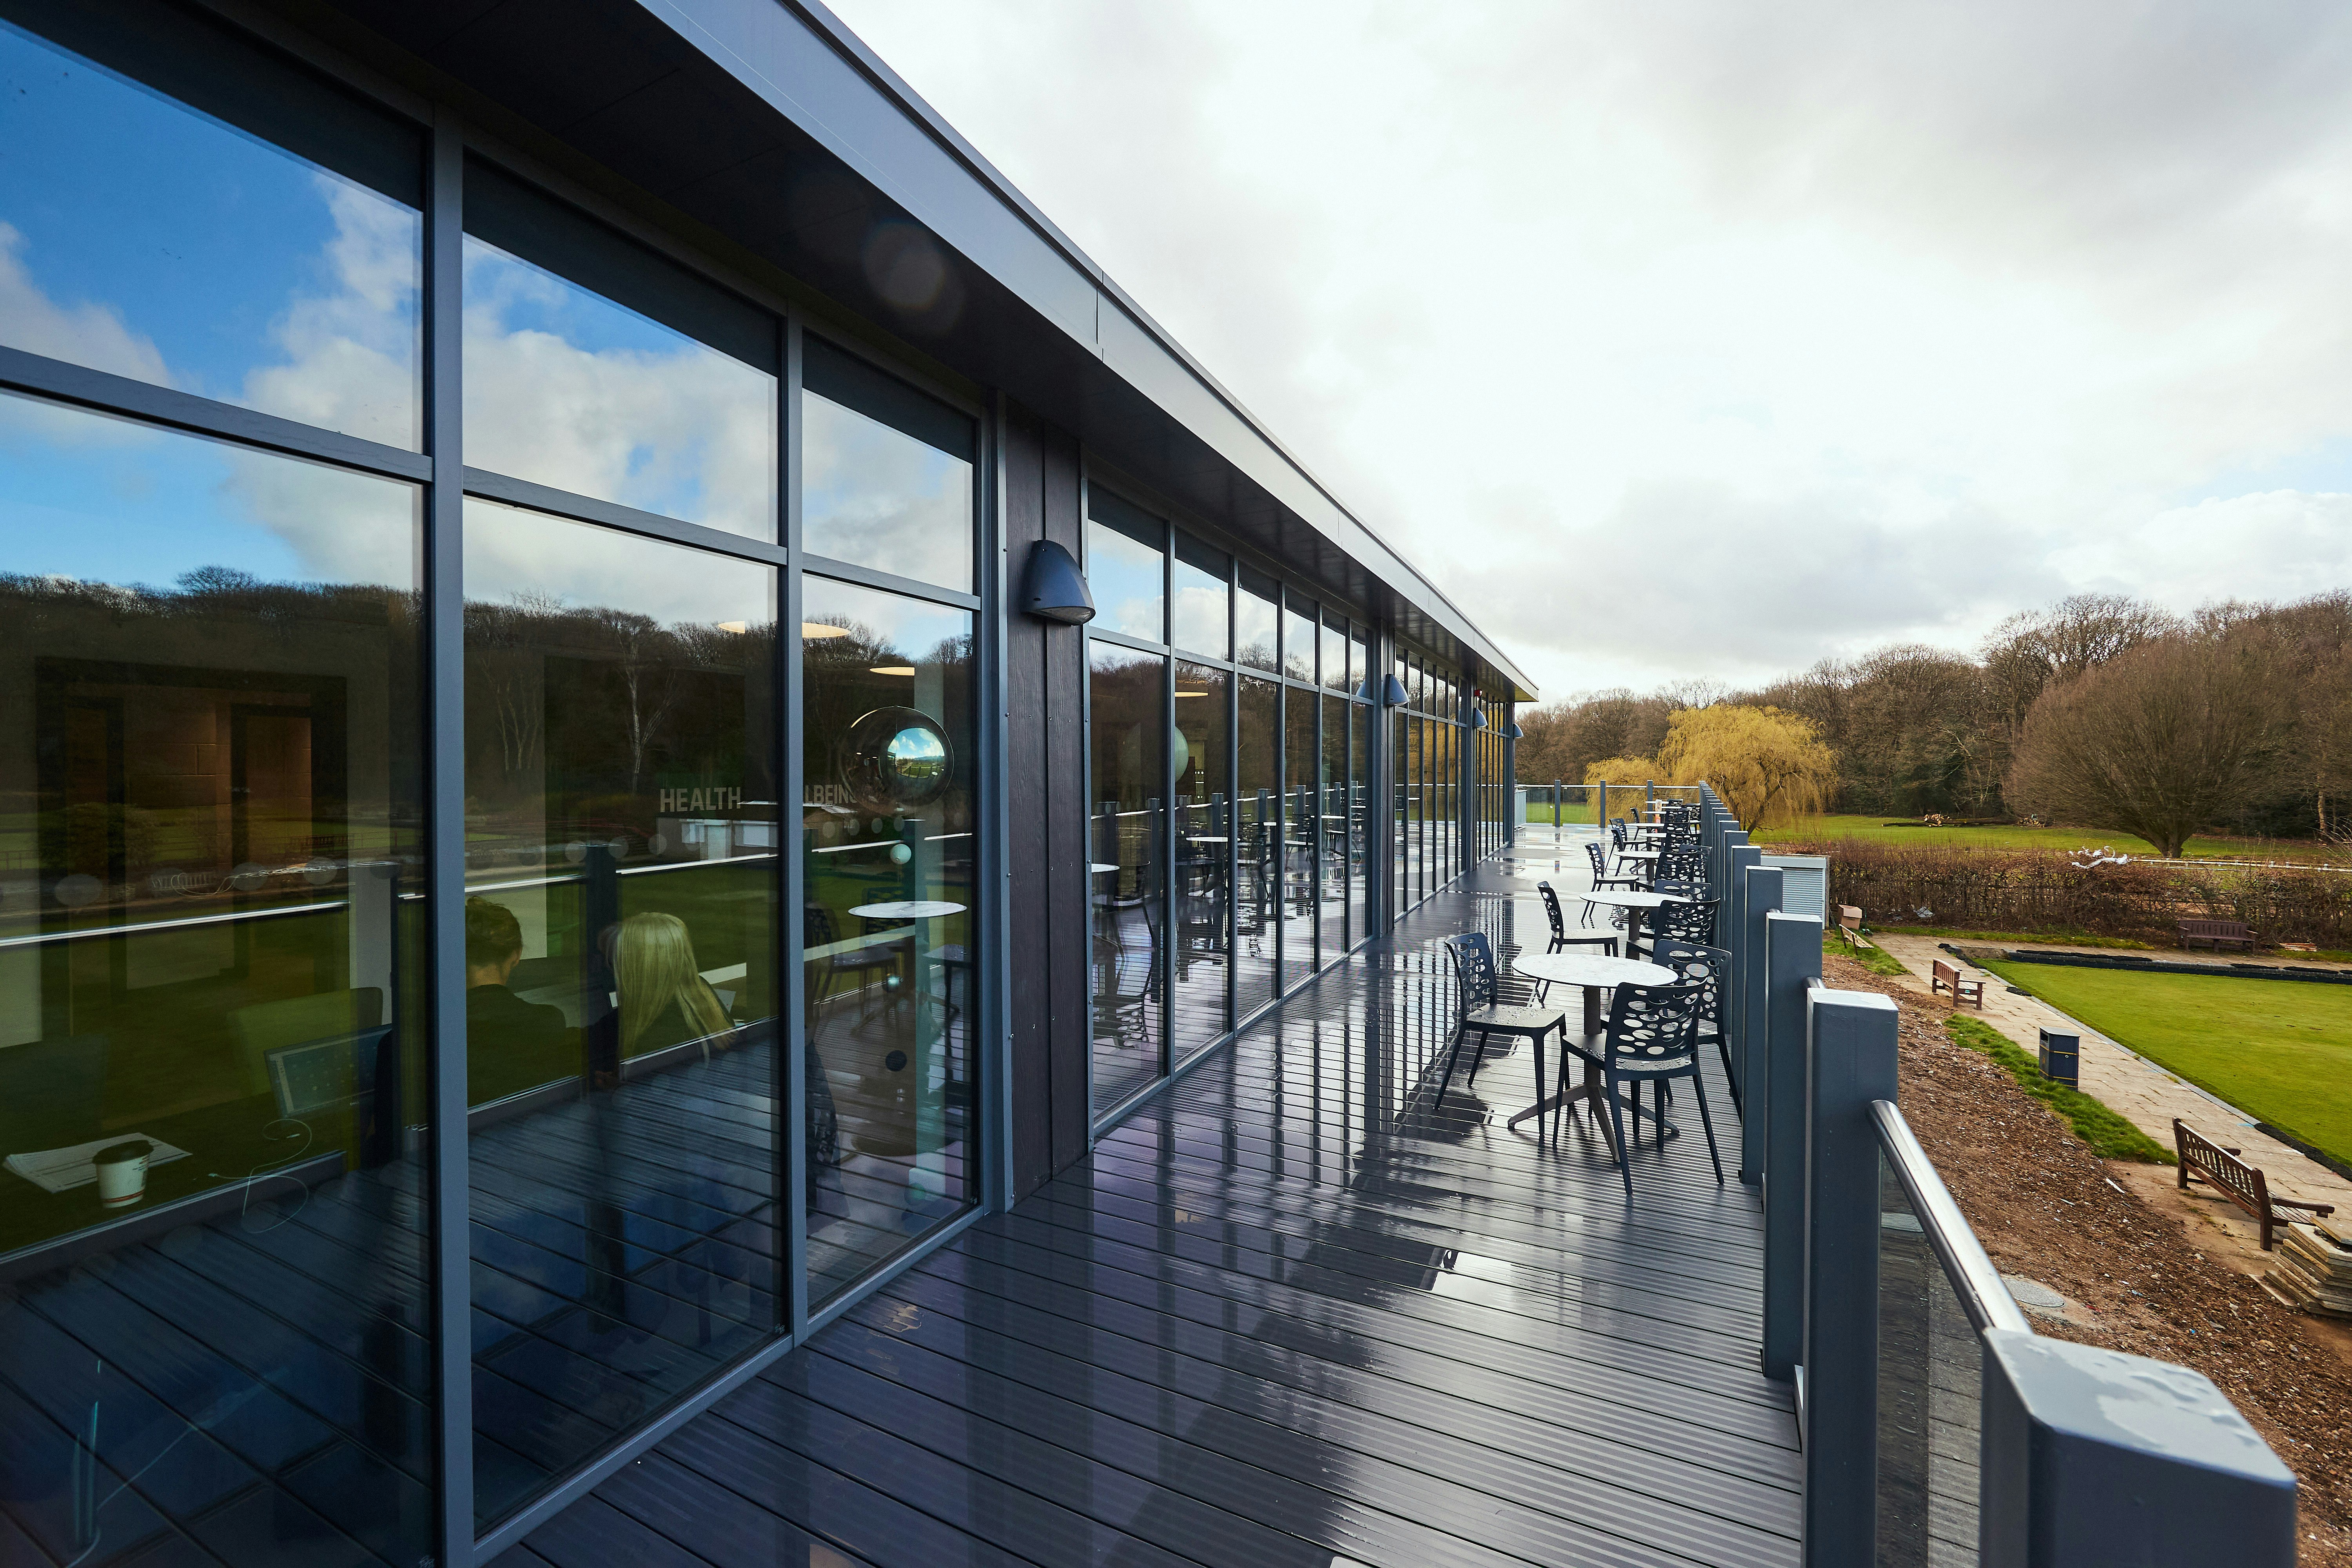 King George's Playing Field & Pavilion - Jubilee Suite, Cafe and out door seating image 2